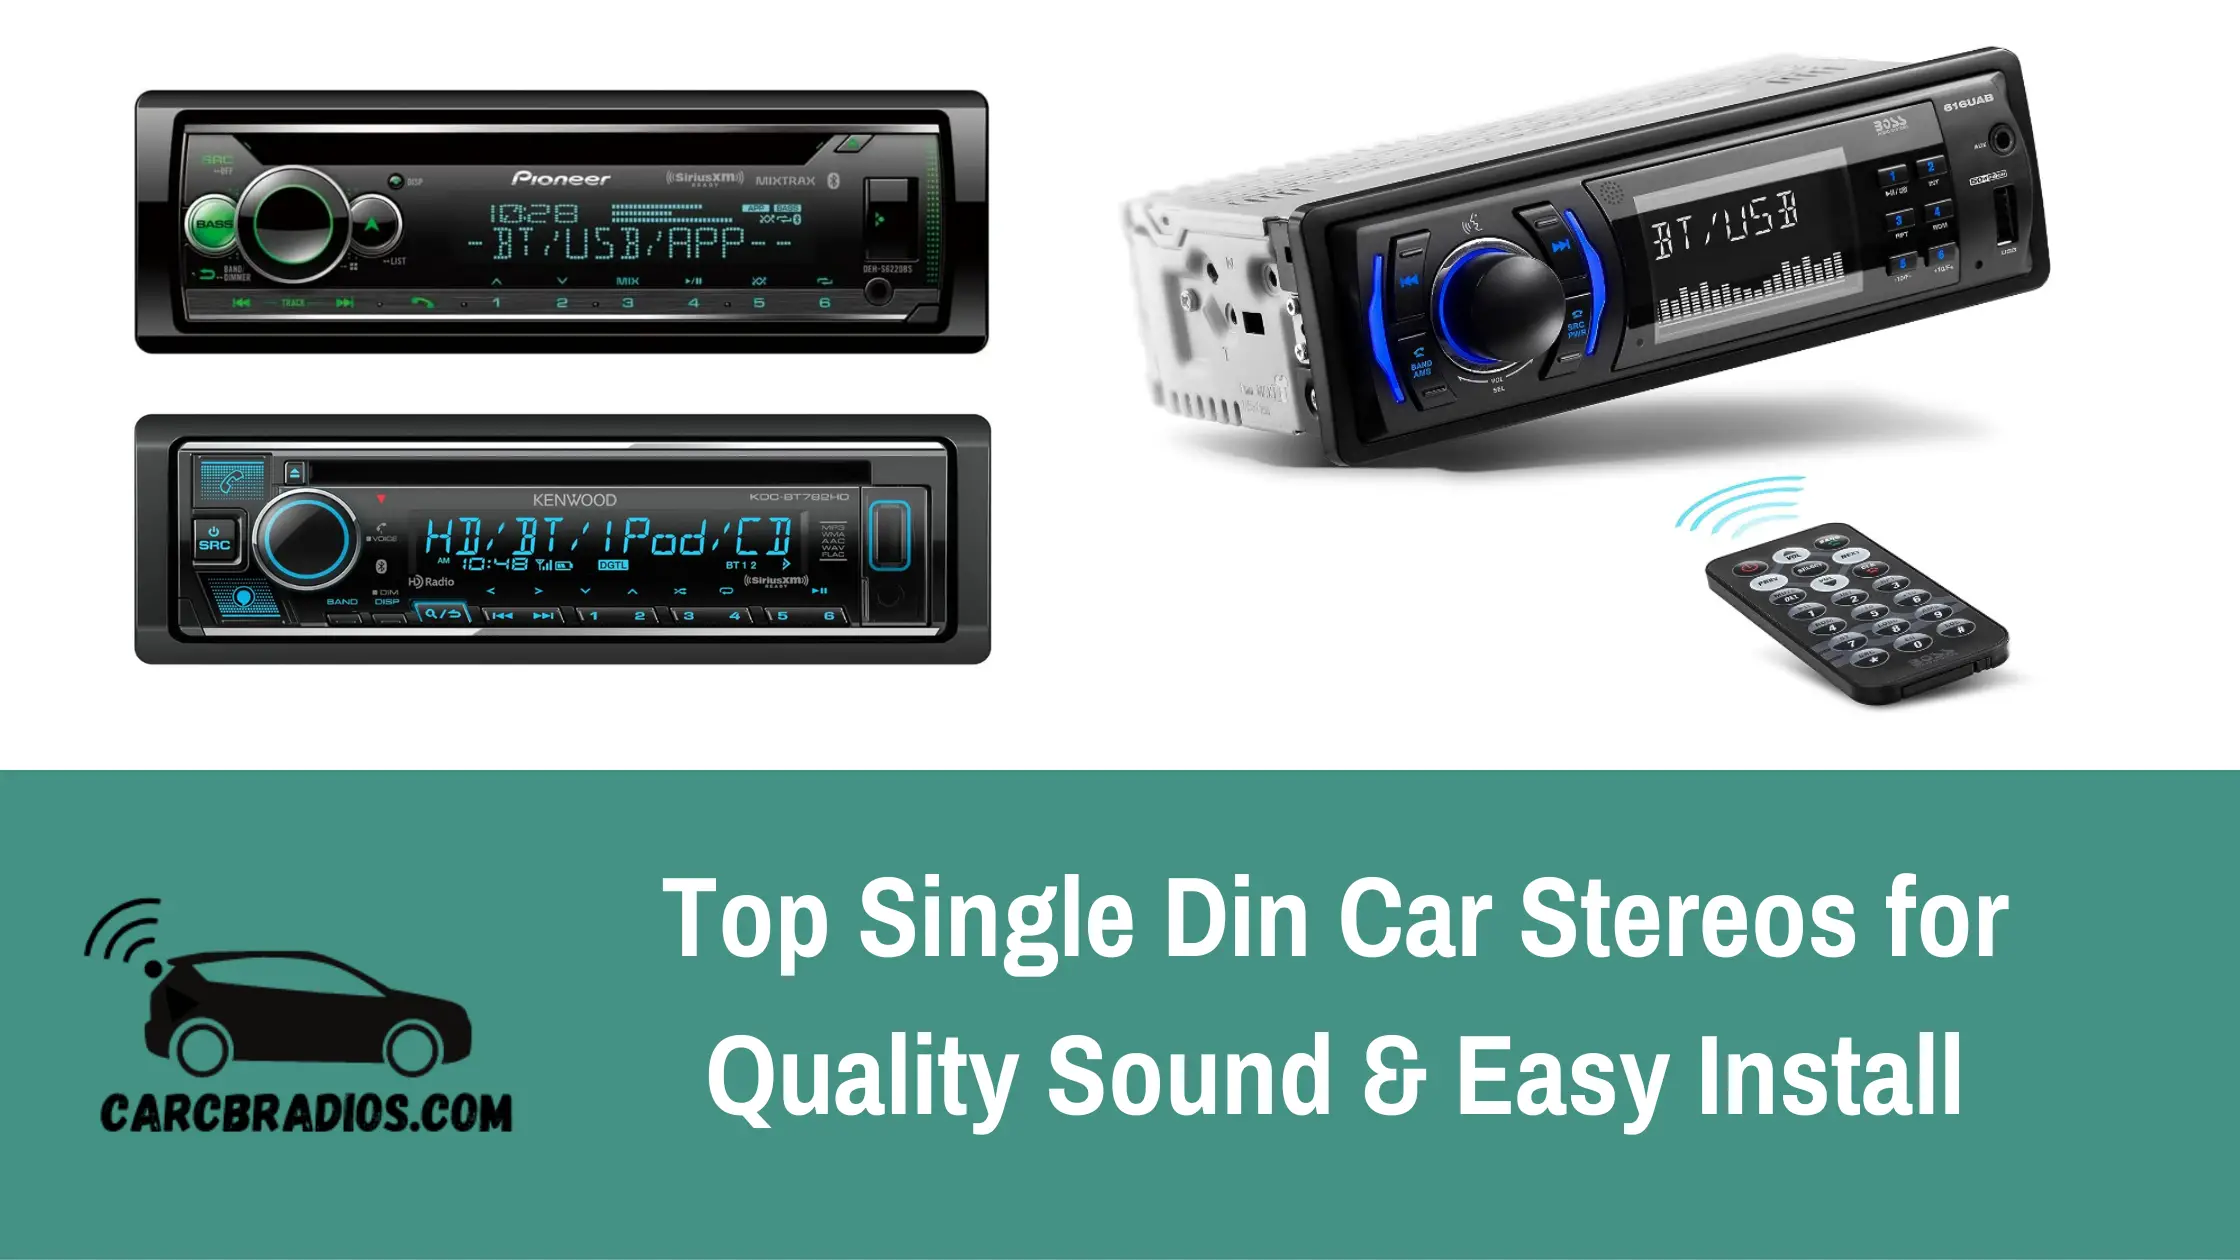 In this article, I will be reviewing the best single din car stereos in 2023. These picks will be based on a variety of categories including cost, connectivity, and sound quality. As technology continues to advance, it's important to have a head unit that is compatible with smartphones and internet radio apps. That's why I will be looking for stereos that have features such as USB ports, Bluetooth technology, and integrated music app functionality